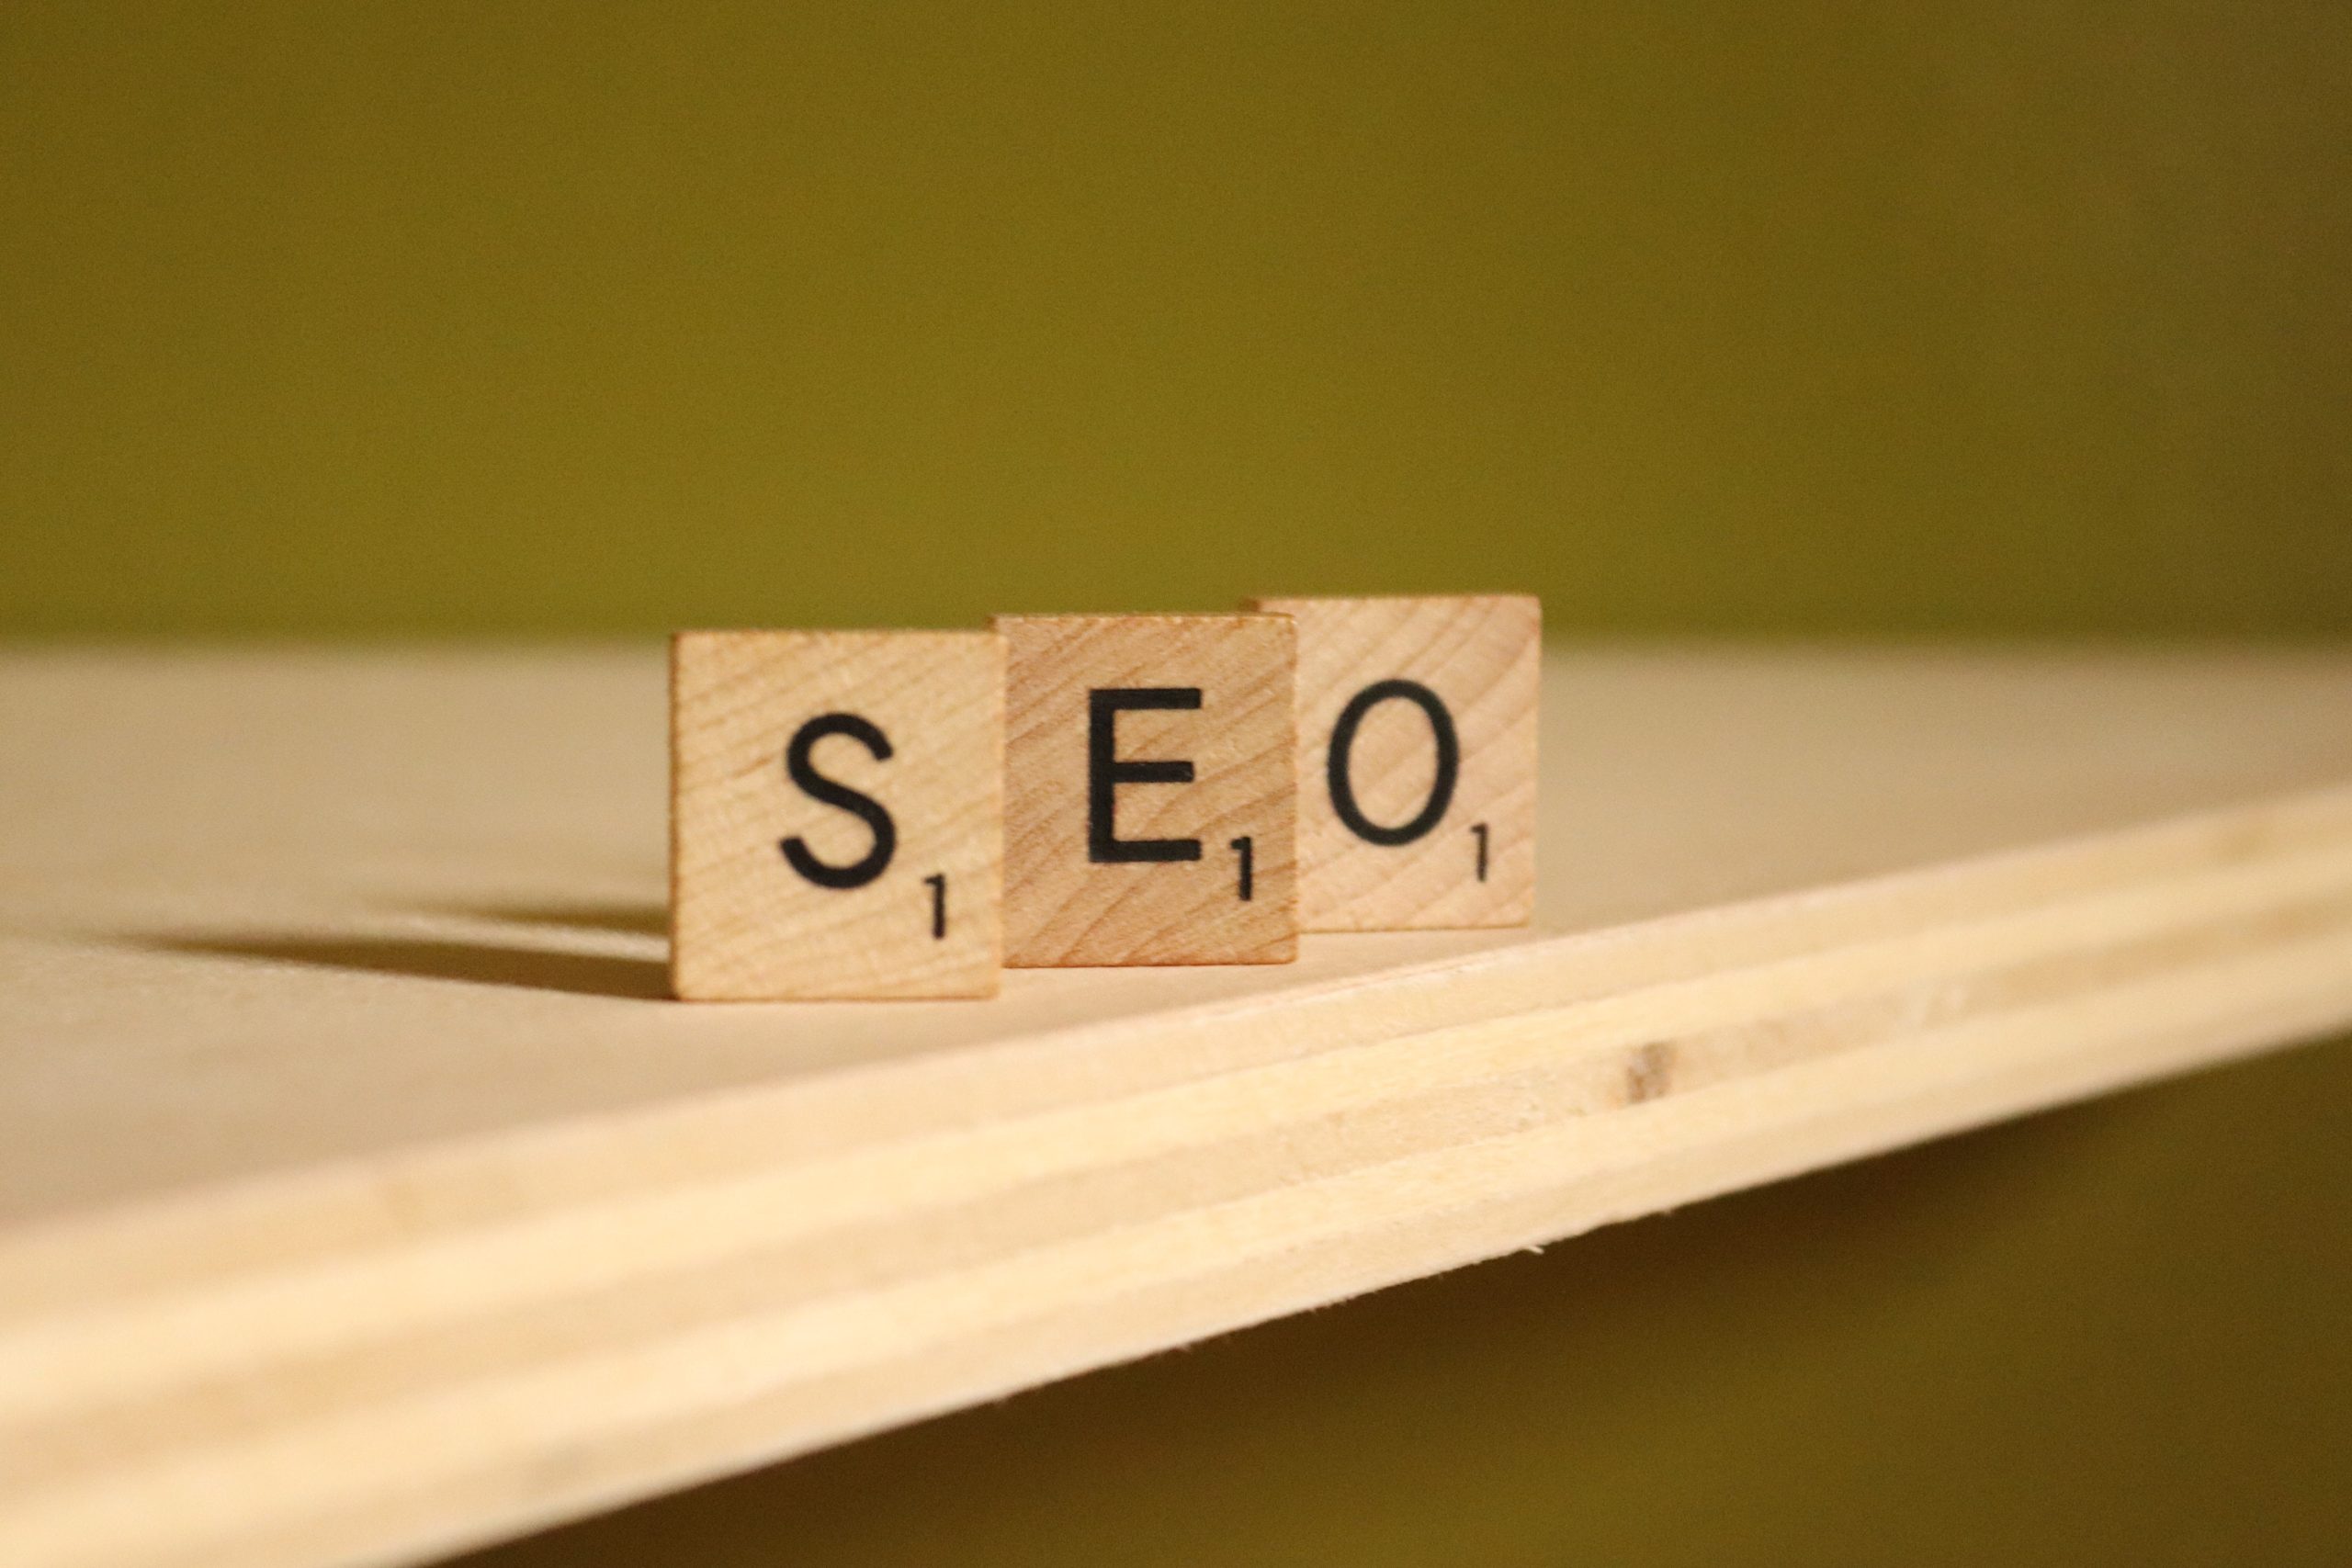 E-A-T and SEO: Building Expertise, Authoritativeness, and Trustworthiness